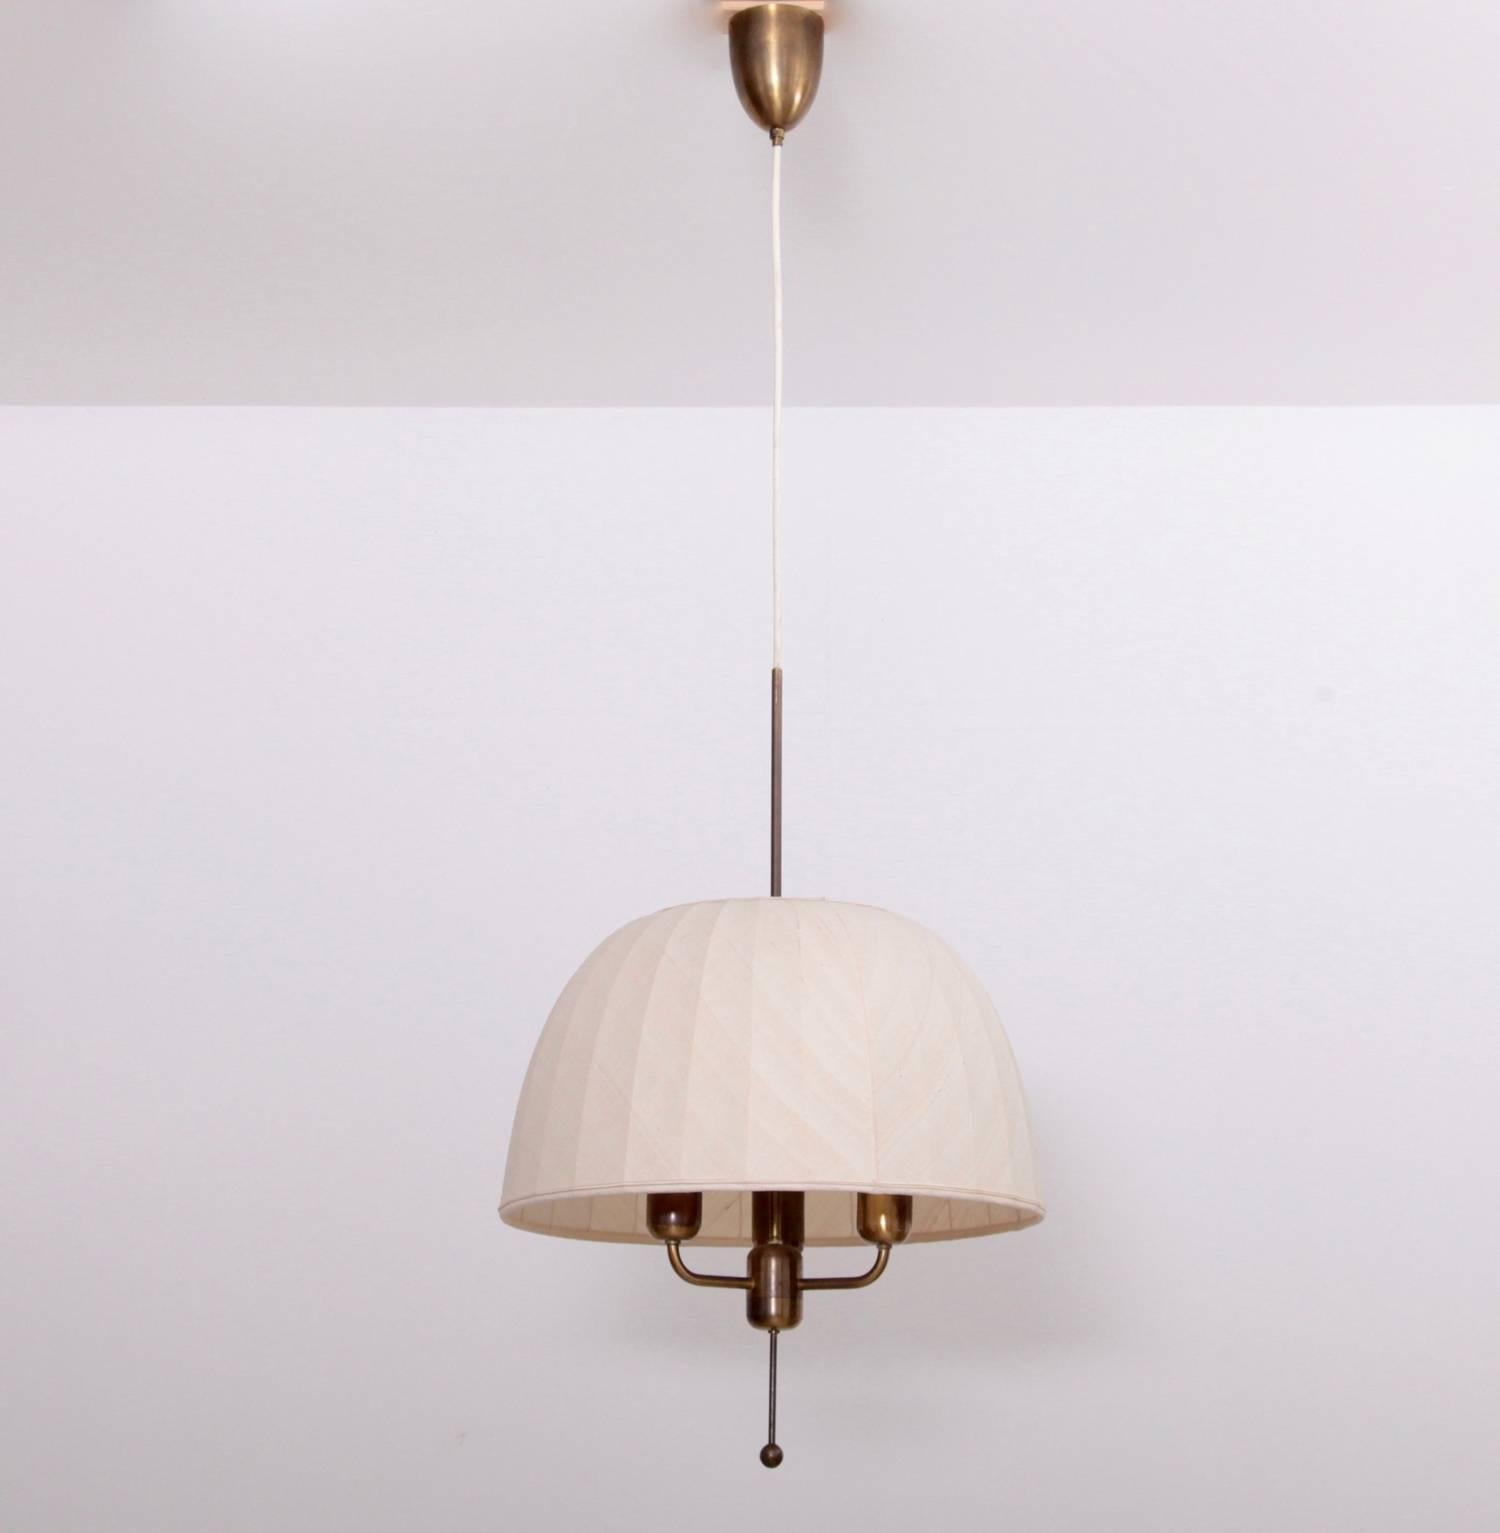 Beautiful and rare large ceiling light with three light sources in brass with a hand-stitched silk shade designed by Hans-Agne Jakobsson for Hans-Agne Jakobsson AB Markaryd Sweden in 1963. 3 x E27/Model A and 75 watts each max.